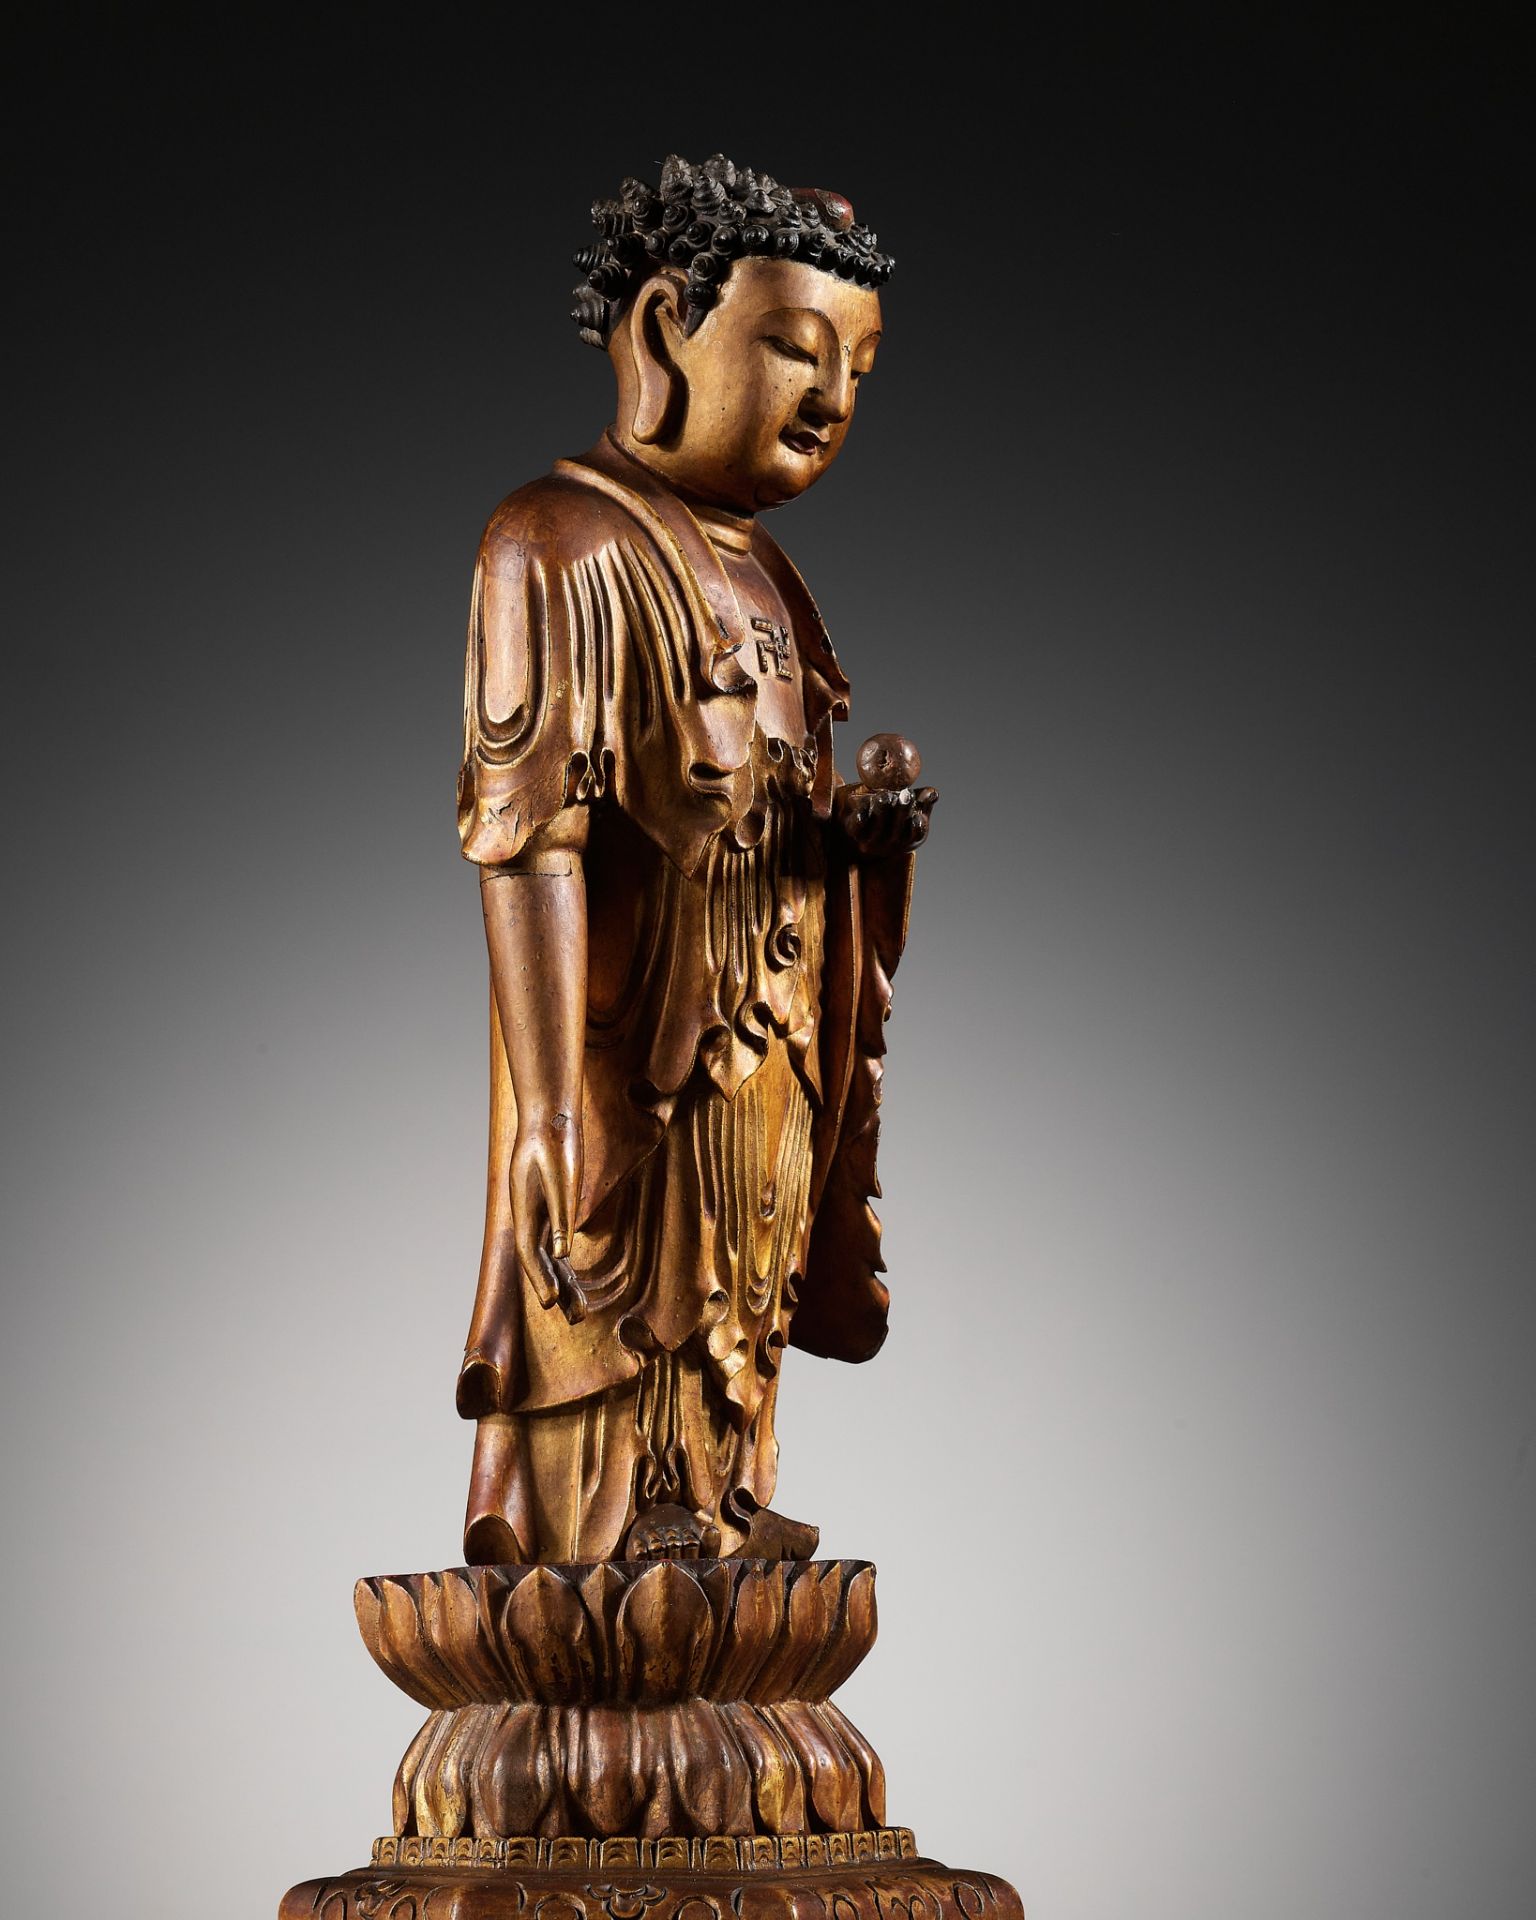 A LACQUER-GILT WOOD FIGURE OF THE STANDING BUDDHA, CHINA, 17TH - 18TH CENTURY